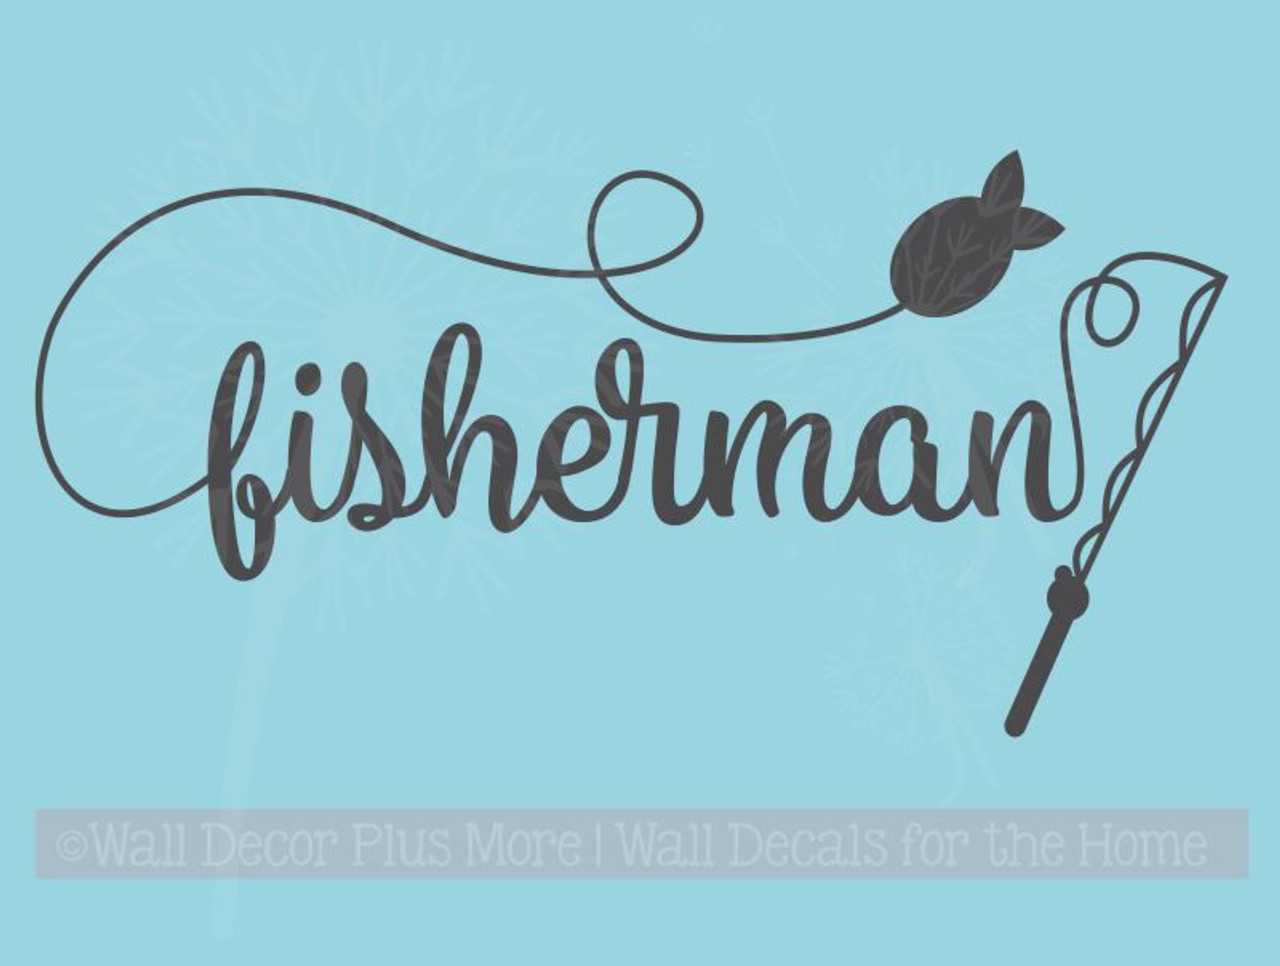 Fisherman Wall Lettering Vinyl Decal Sticker Fishing Pole and Fish